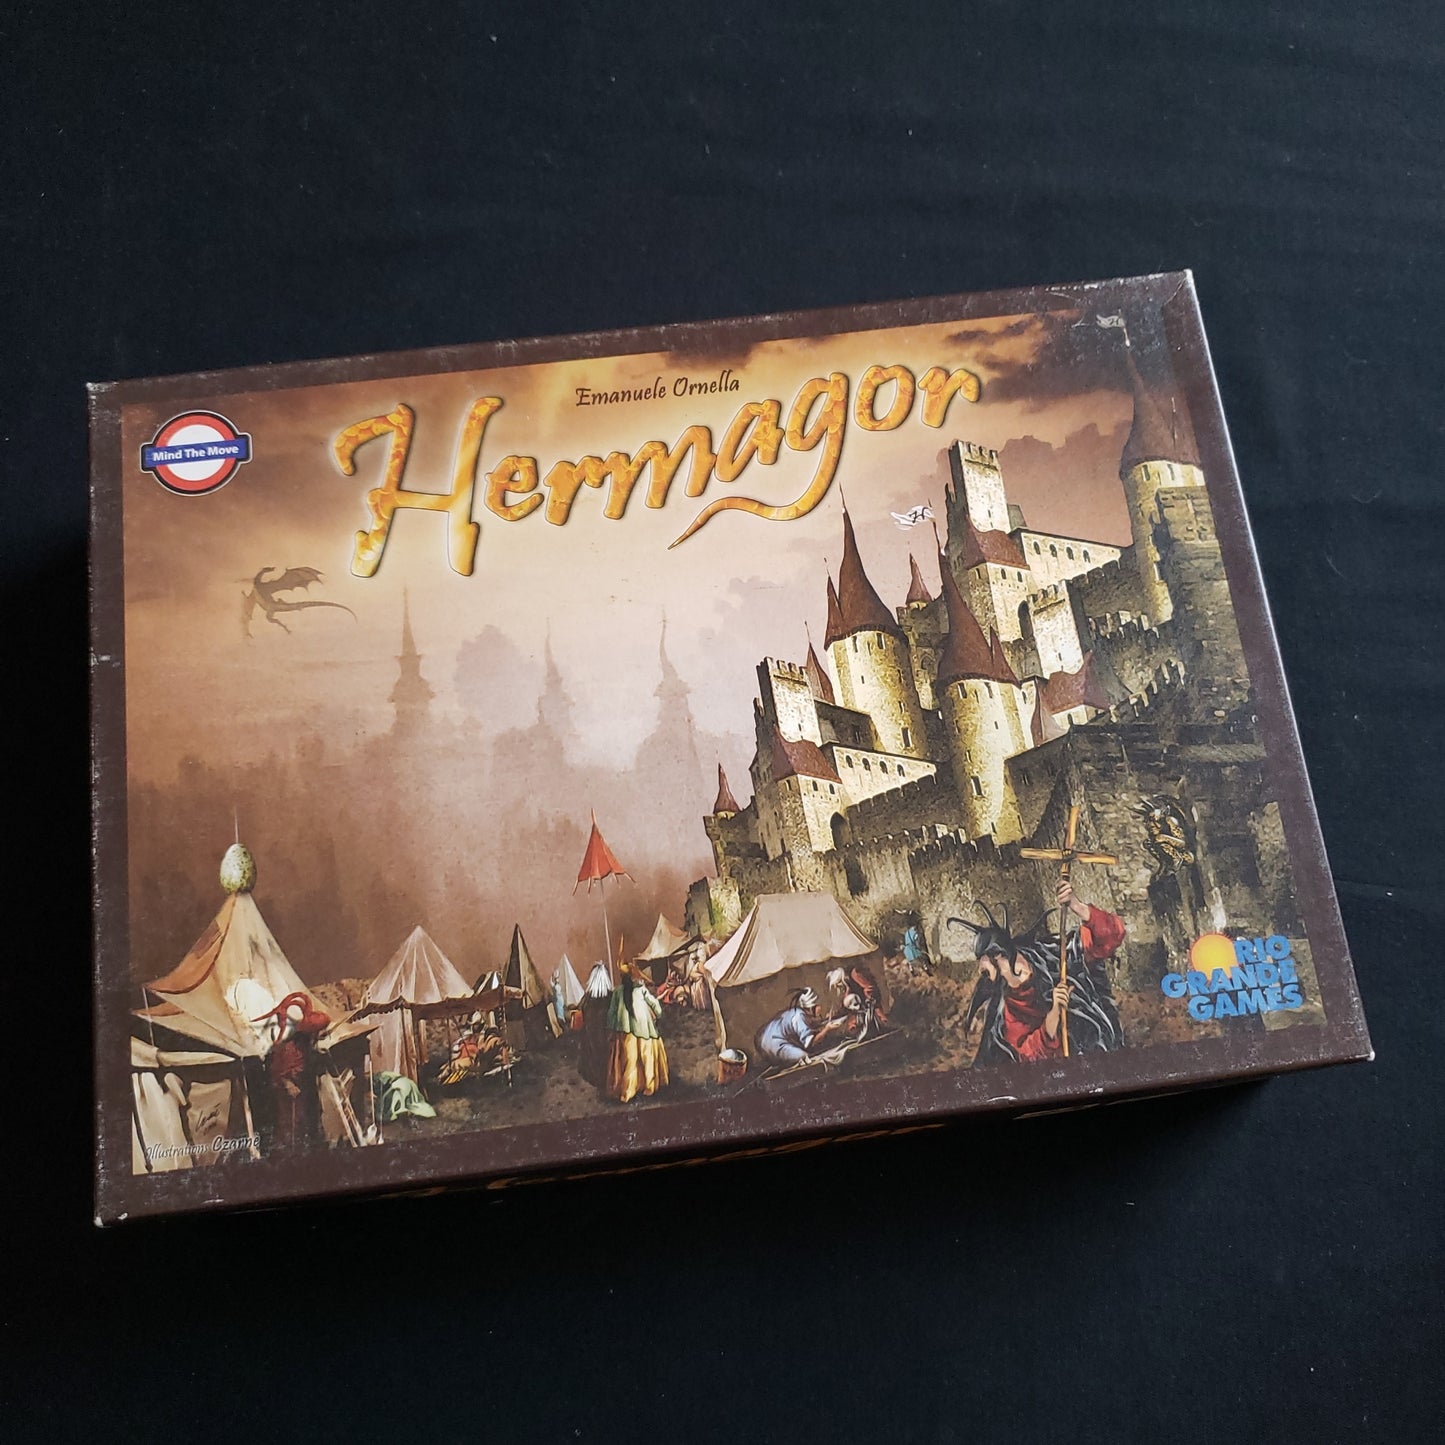 Image shows the front cover of the box of the Hermagor board game